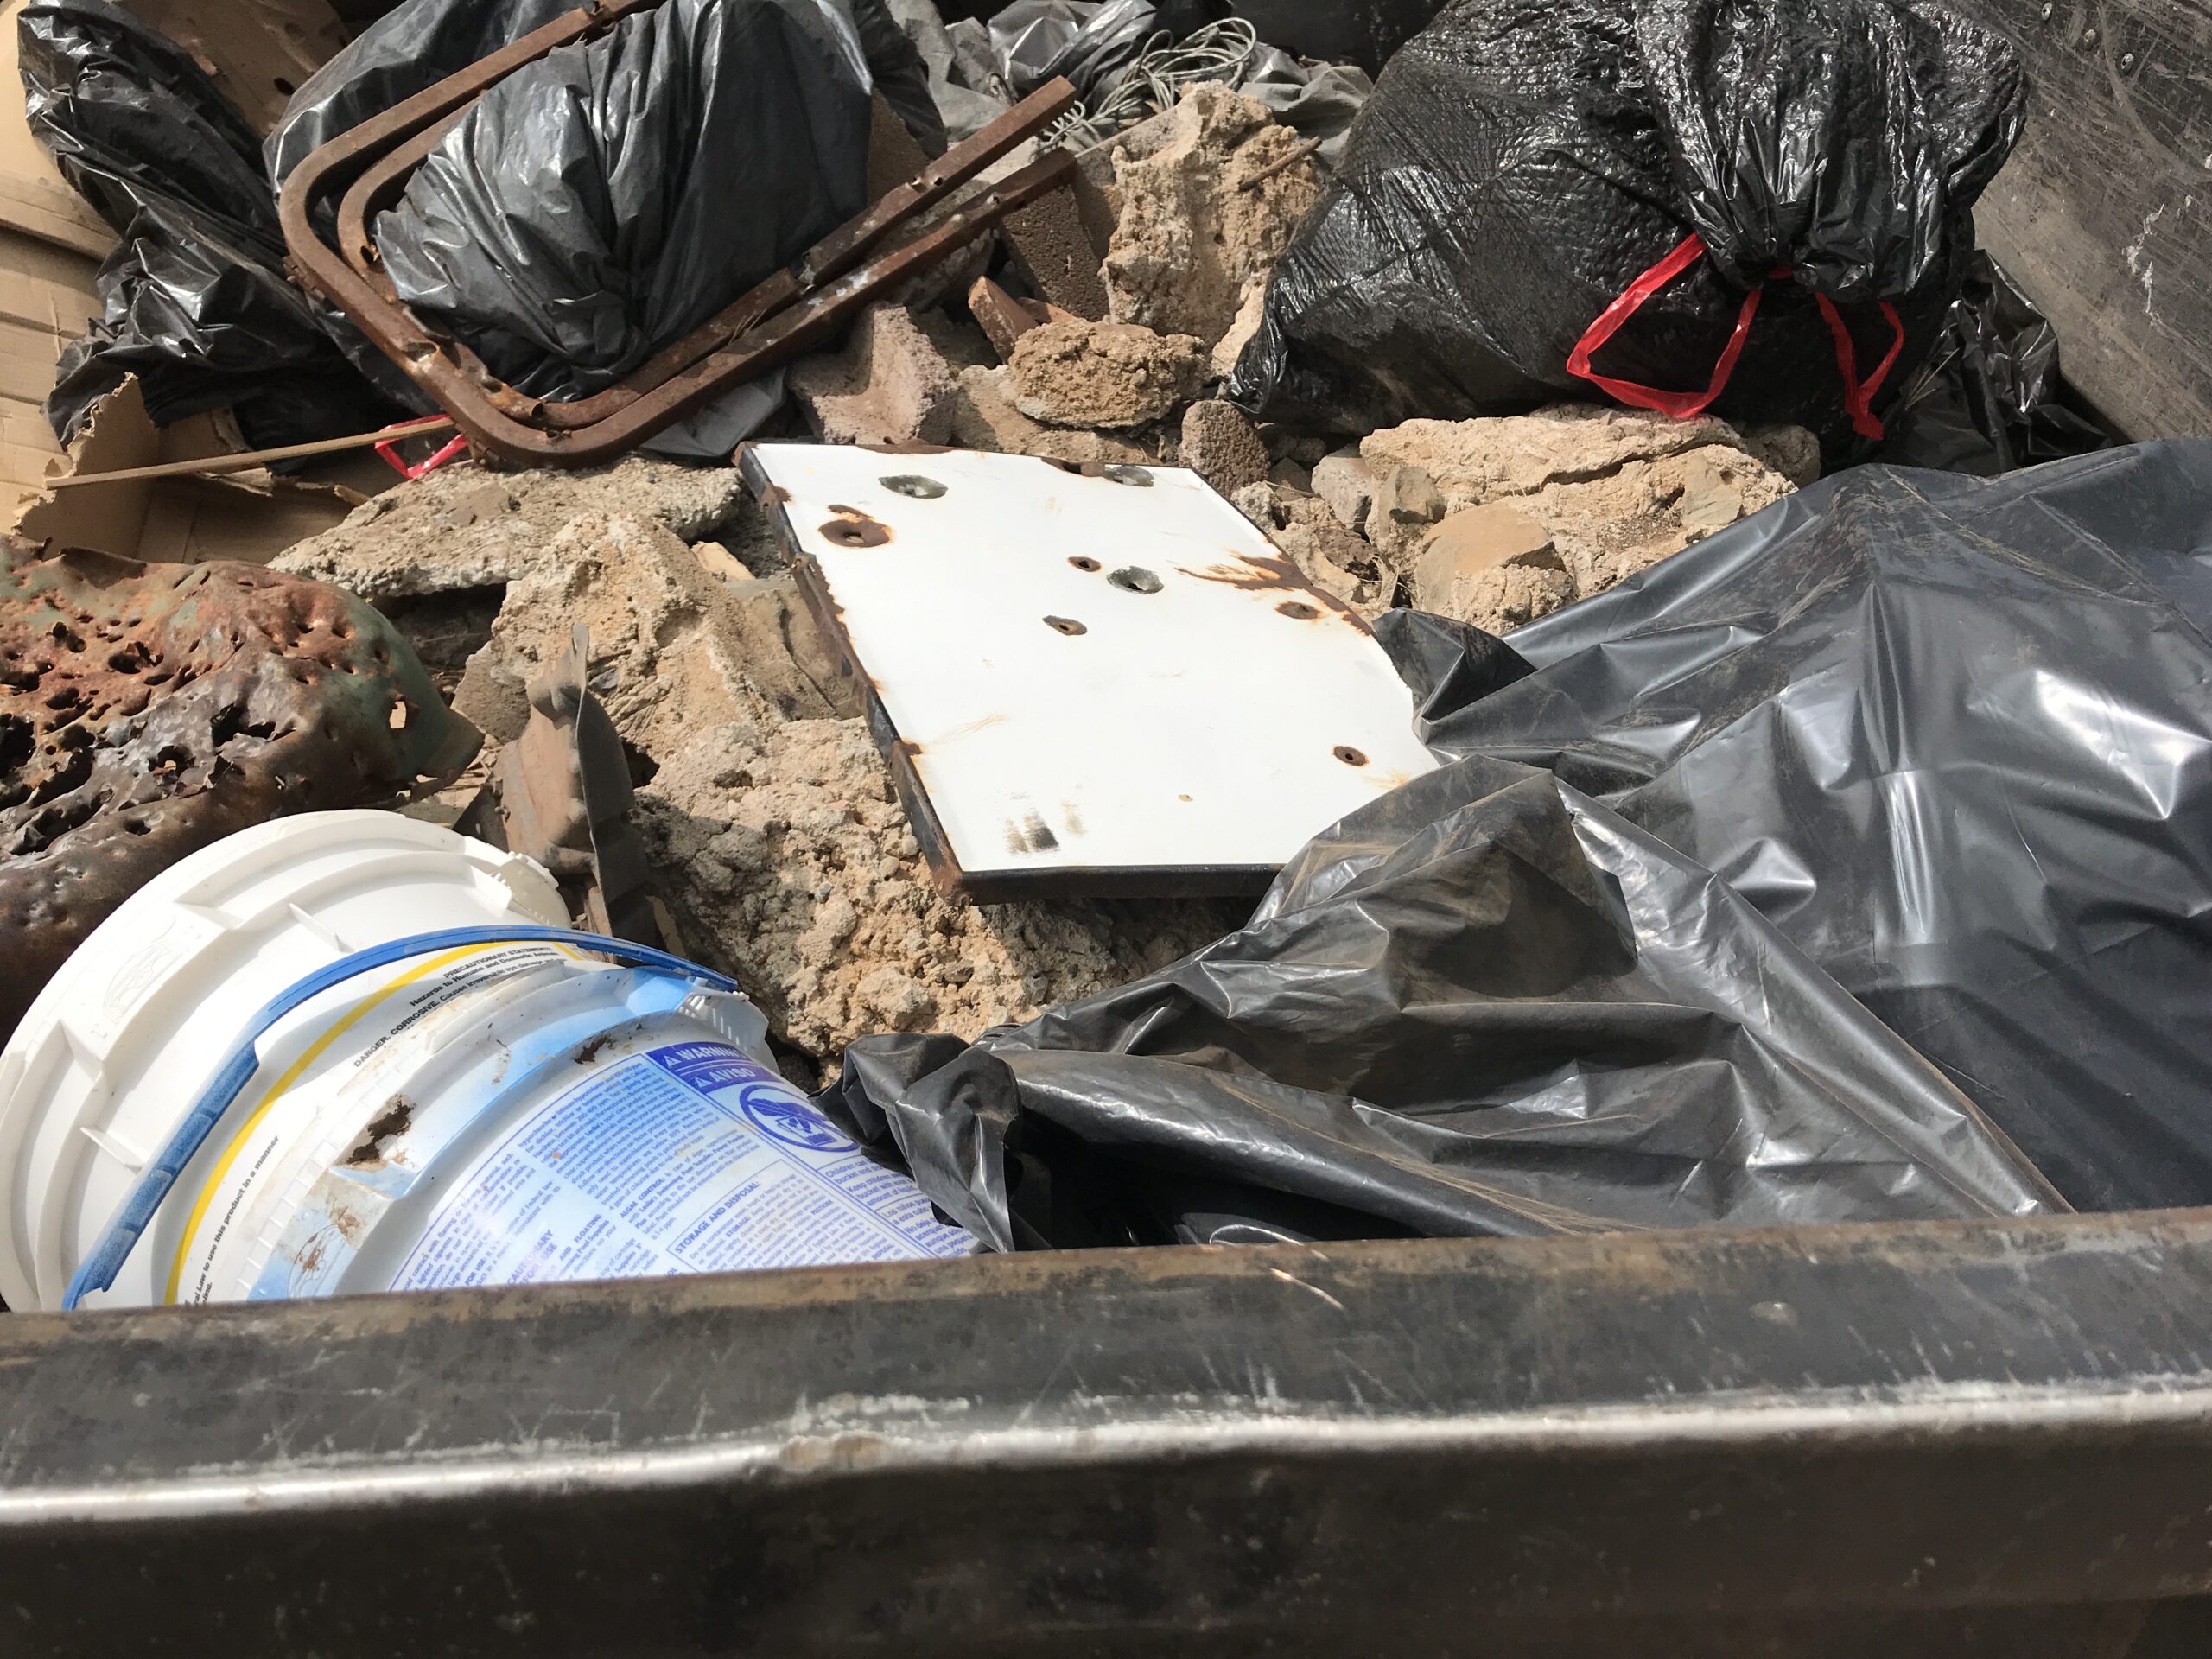 Targets and some of the trash collected